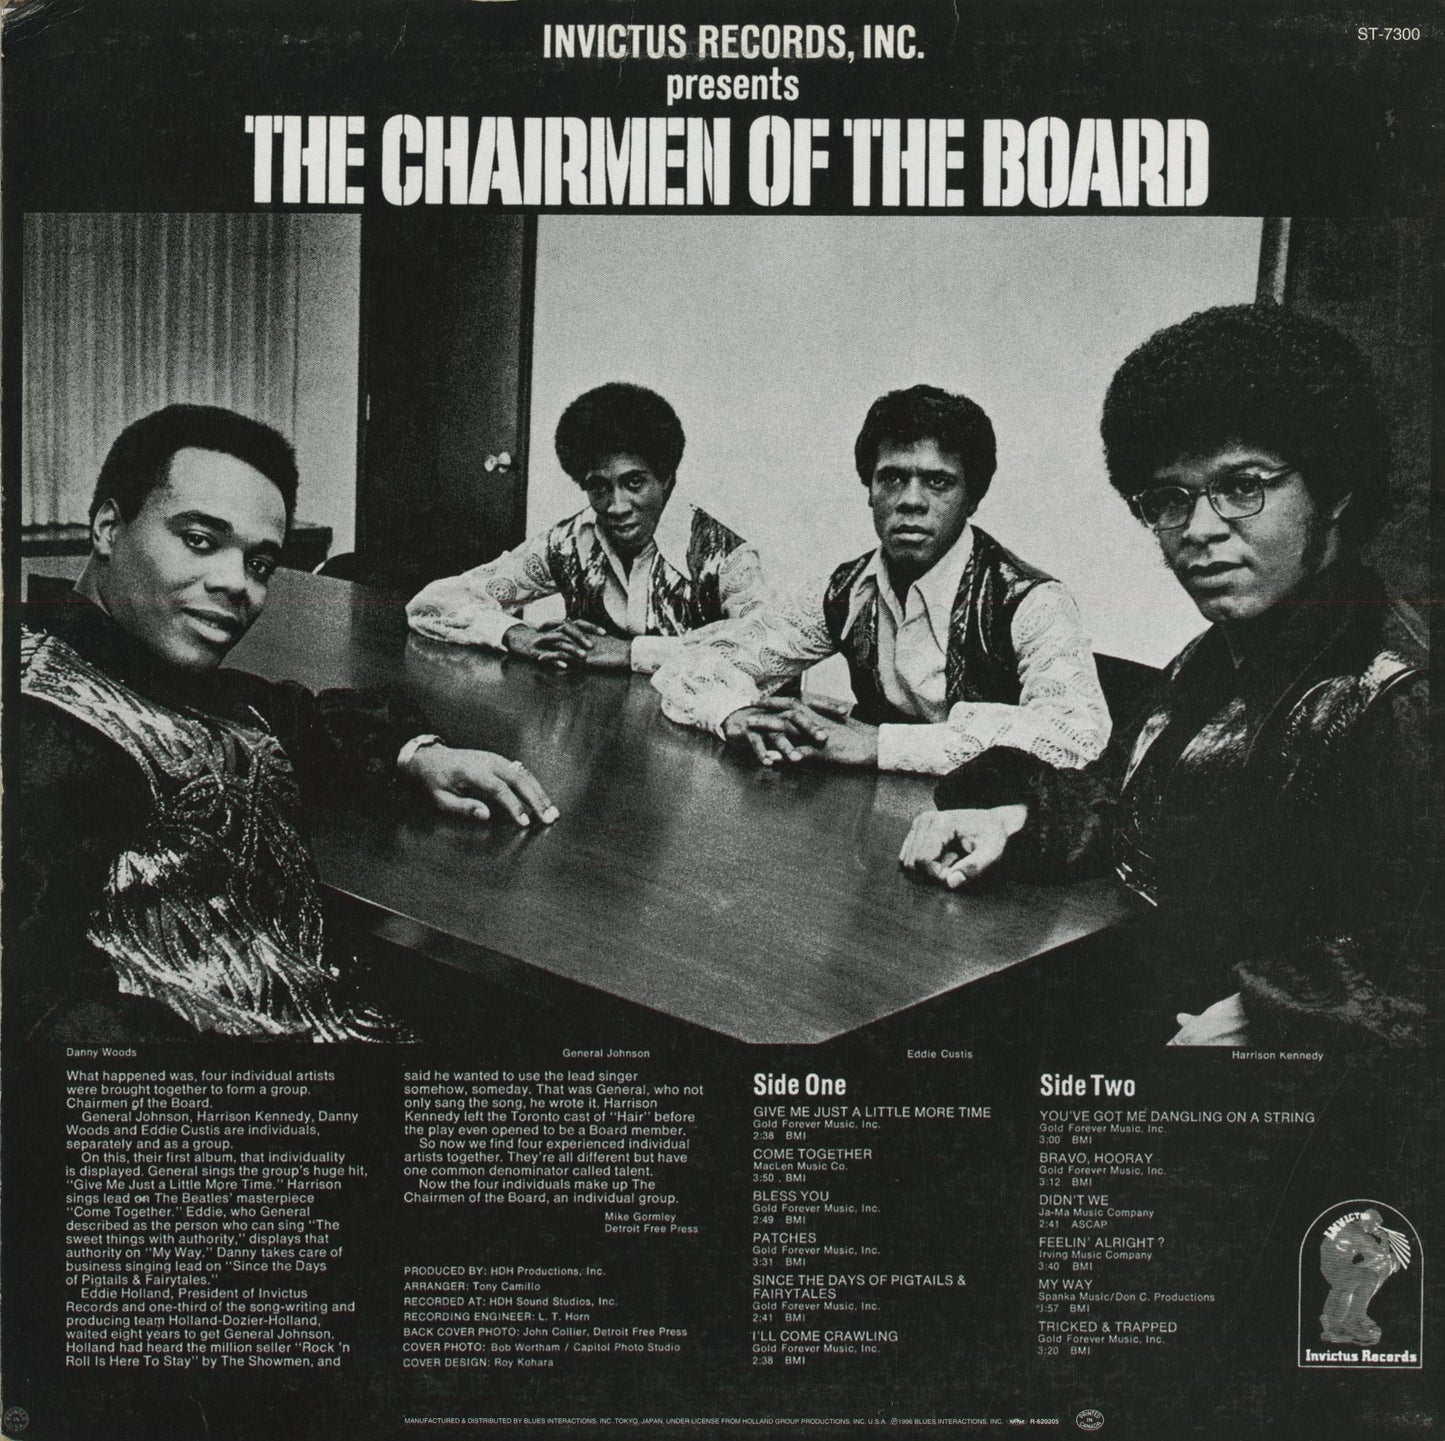 The Chairmen Of The Board / チェアメン・オブ・ザ・ボード / Give Me Just A Little More Time (PLP-6667)